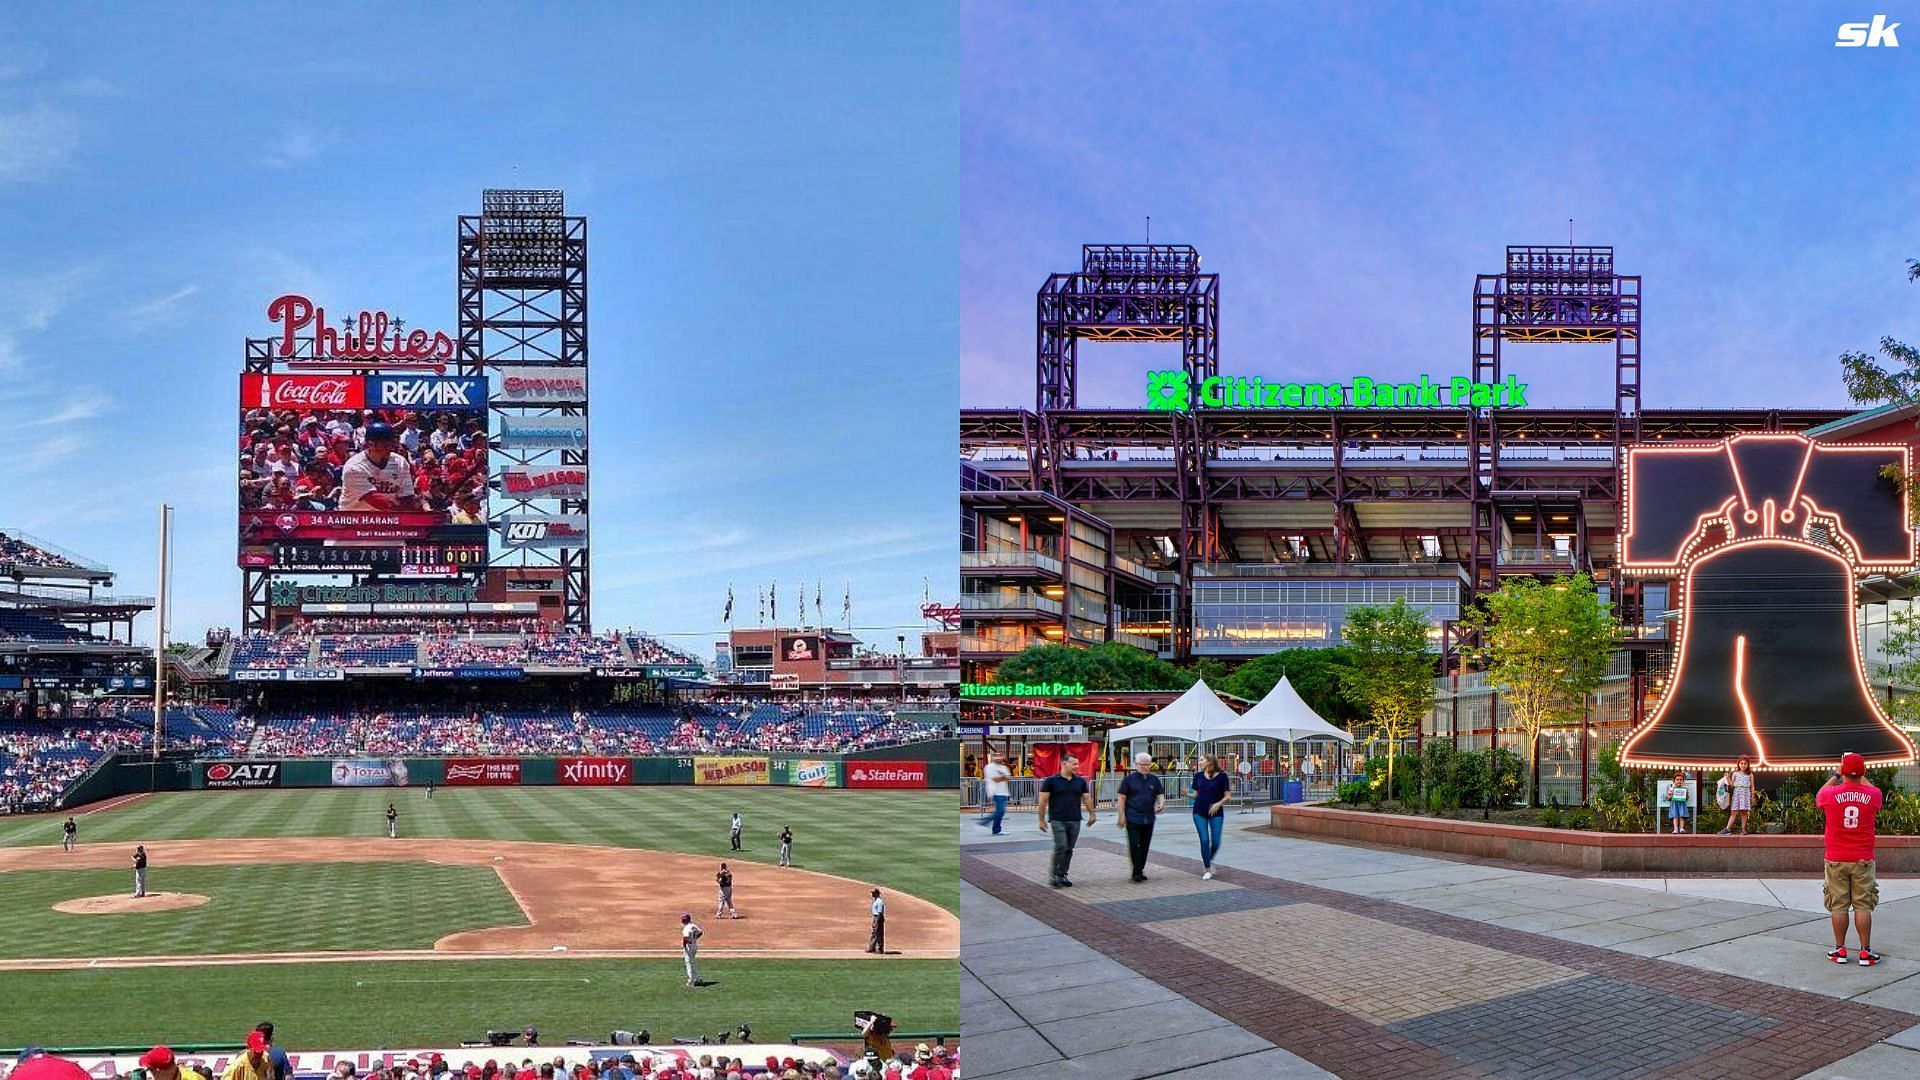 A view of inside and outside of the Phillies home stadium